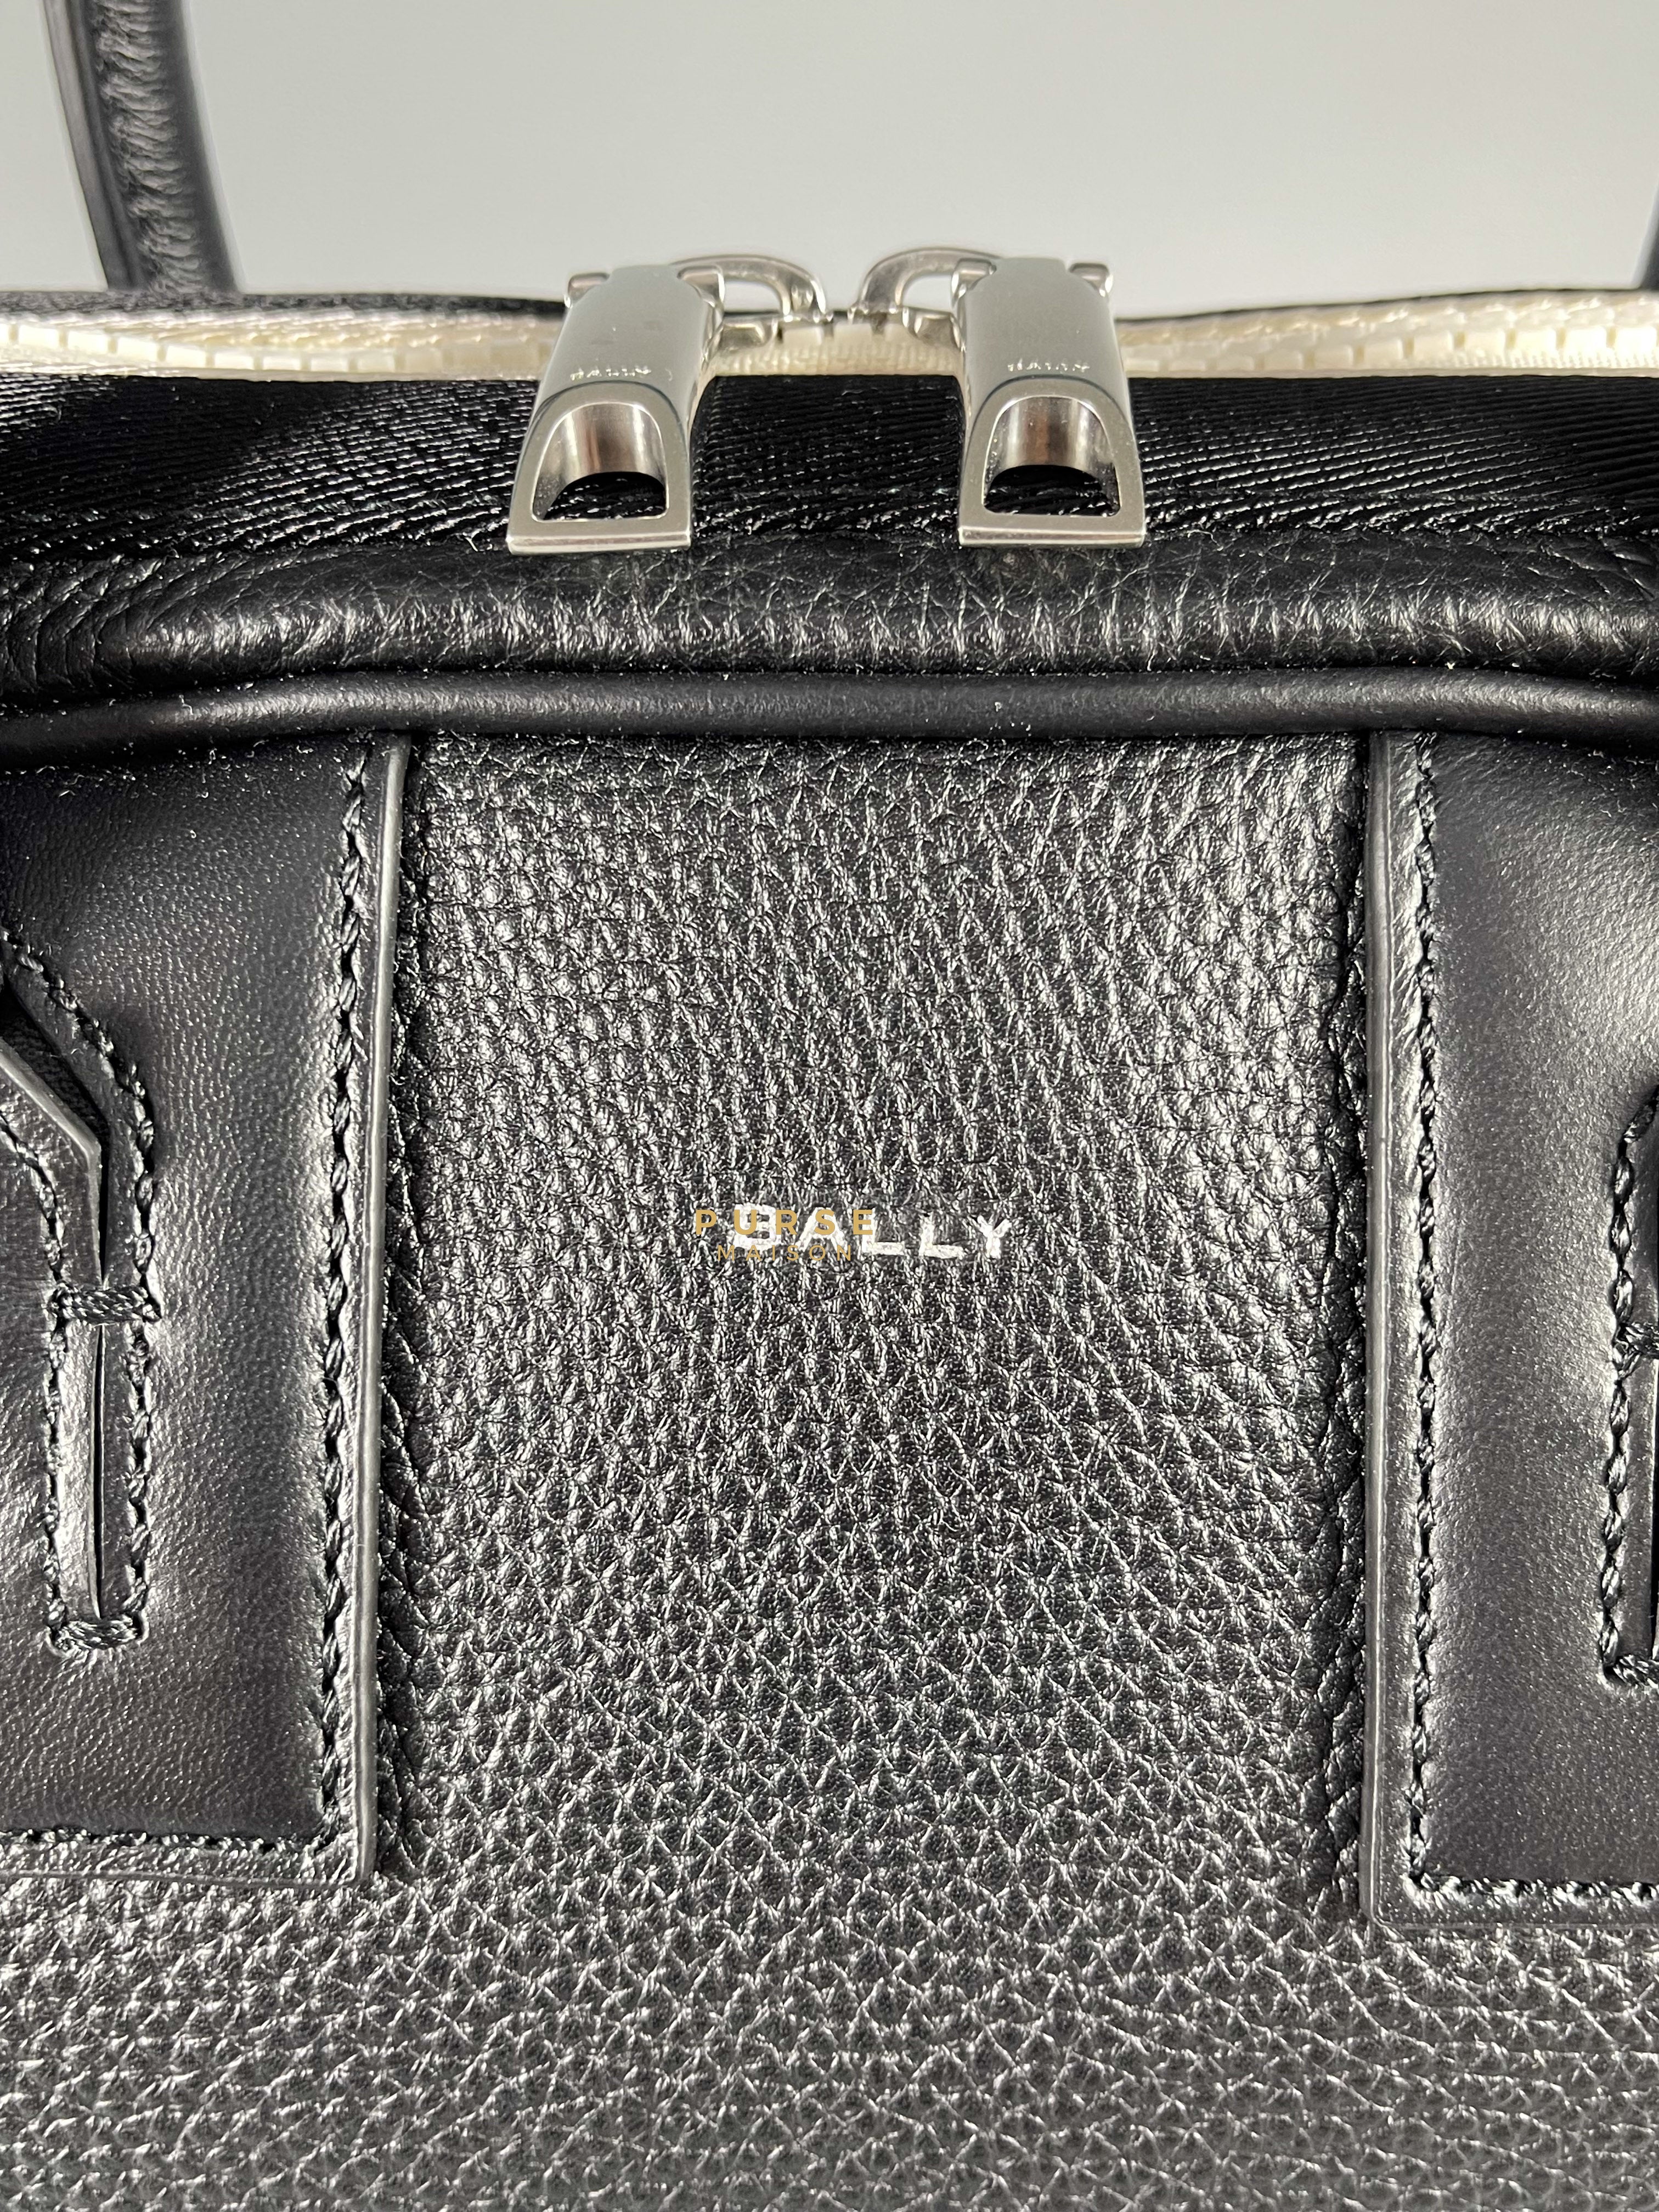 Bally Men’s Briefcase Black in Grained Leather | Purse Maison Luxury Bags Shop